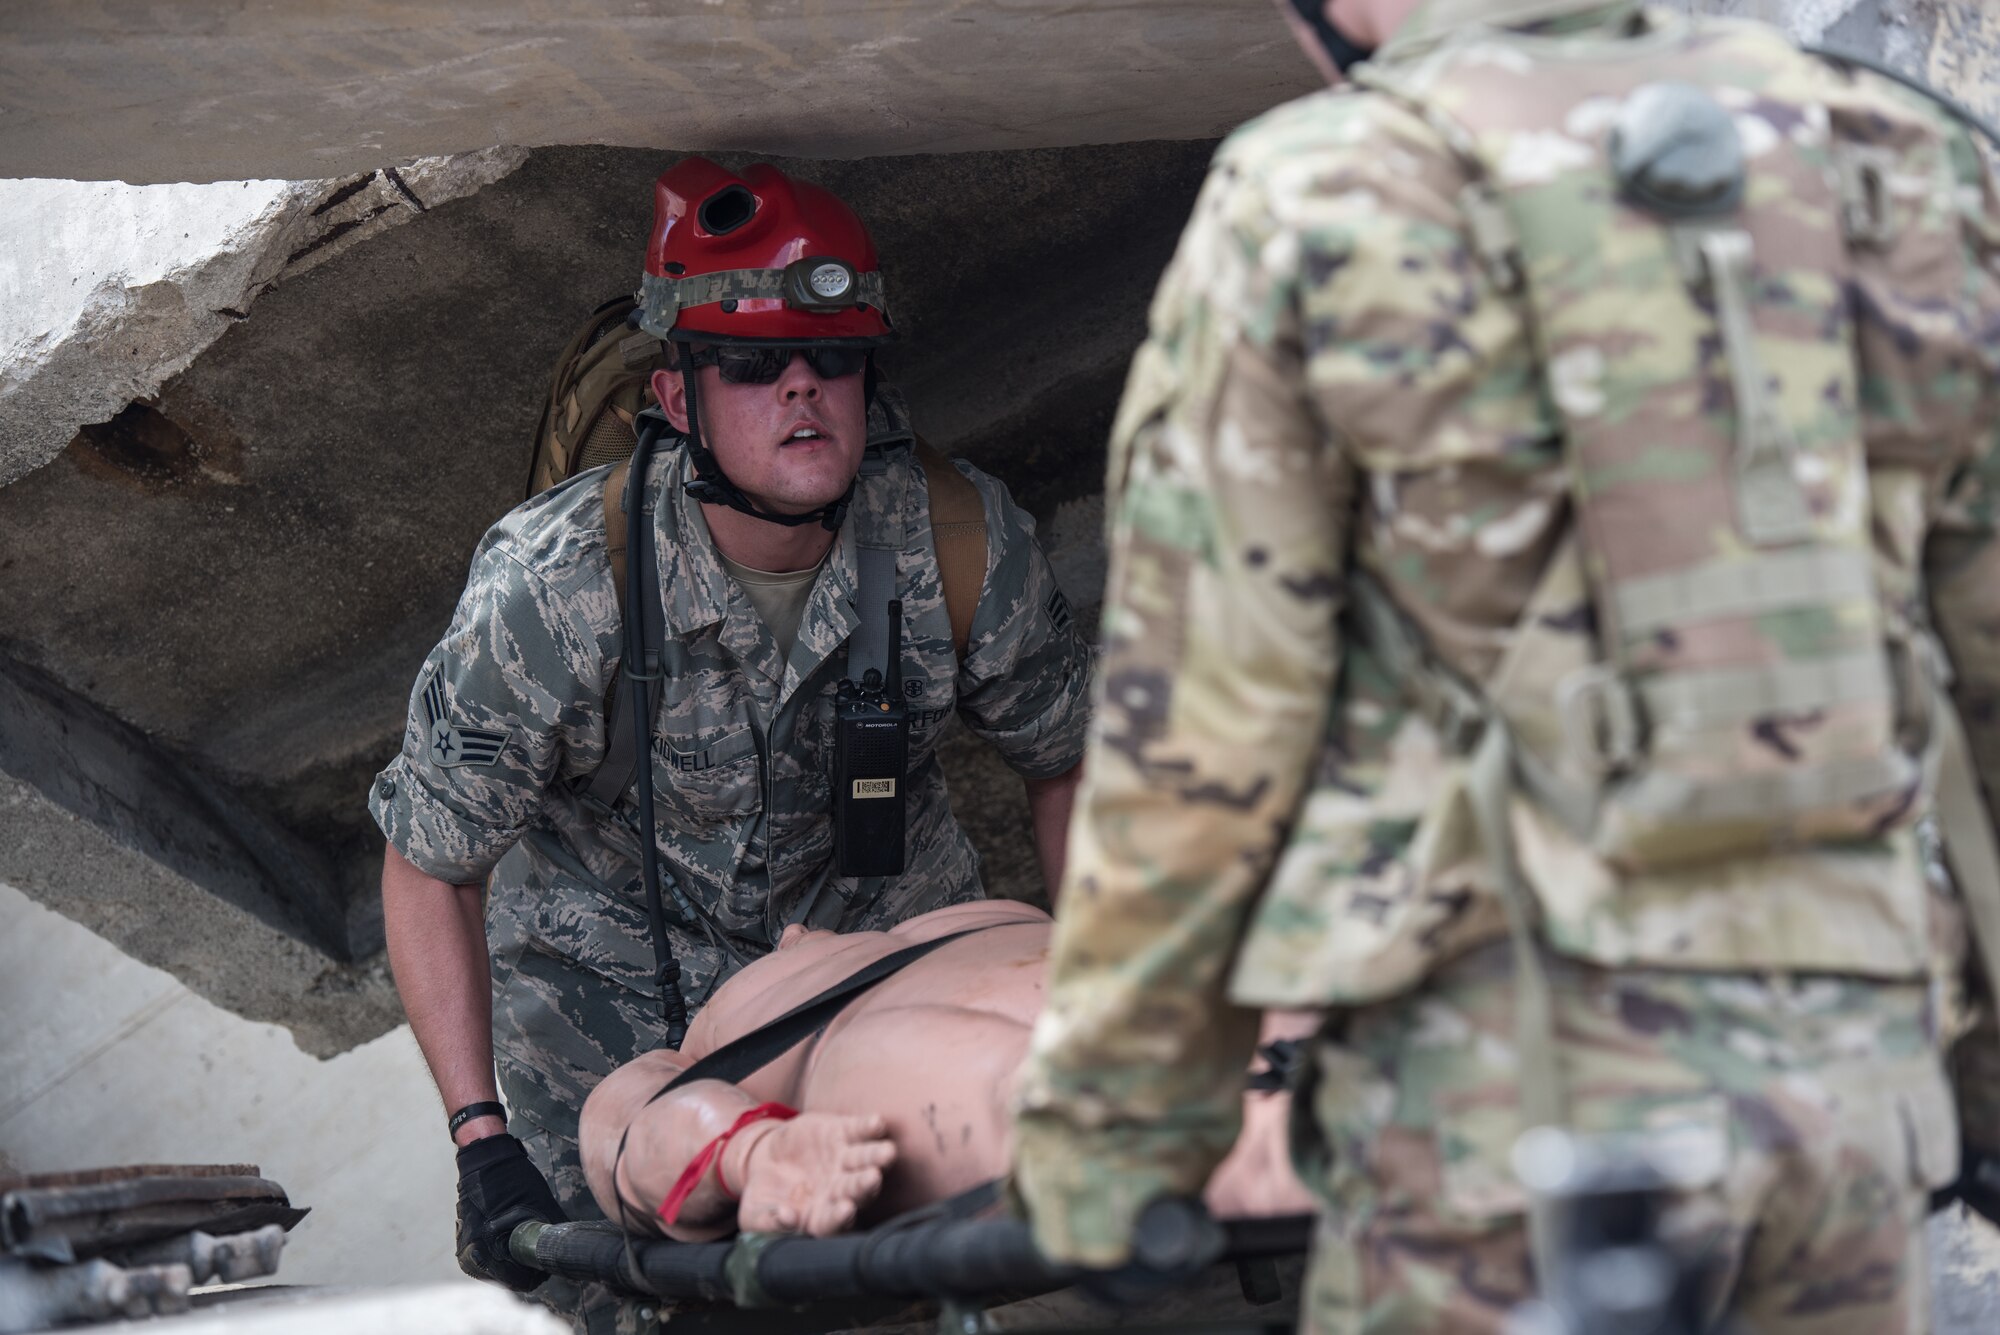 U.S. Air Force Senior Airman Justin Kidwell, a search and extraction medic with the 193rd Special Operations Medical Group Detachment 1, Pennsylvania Air National Guard, helps carry a casualty on a litter during exercise Vigilant Guard.